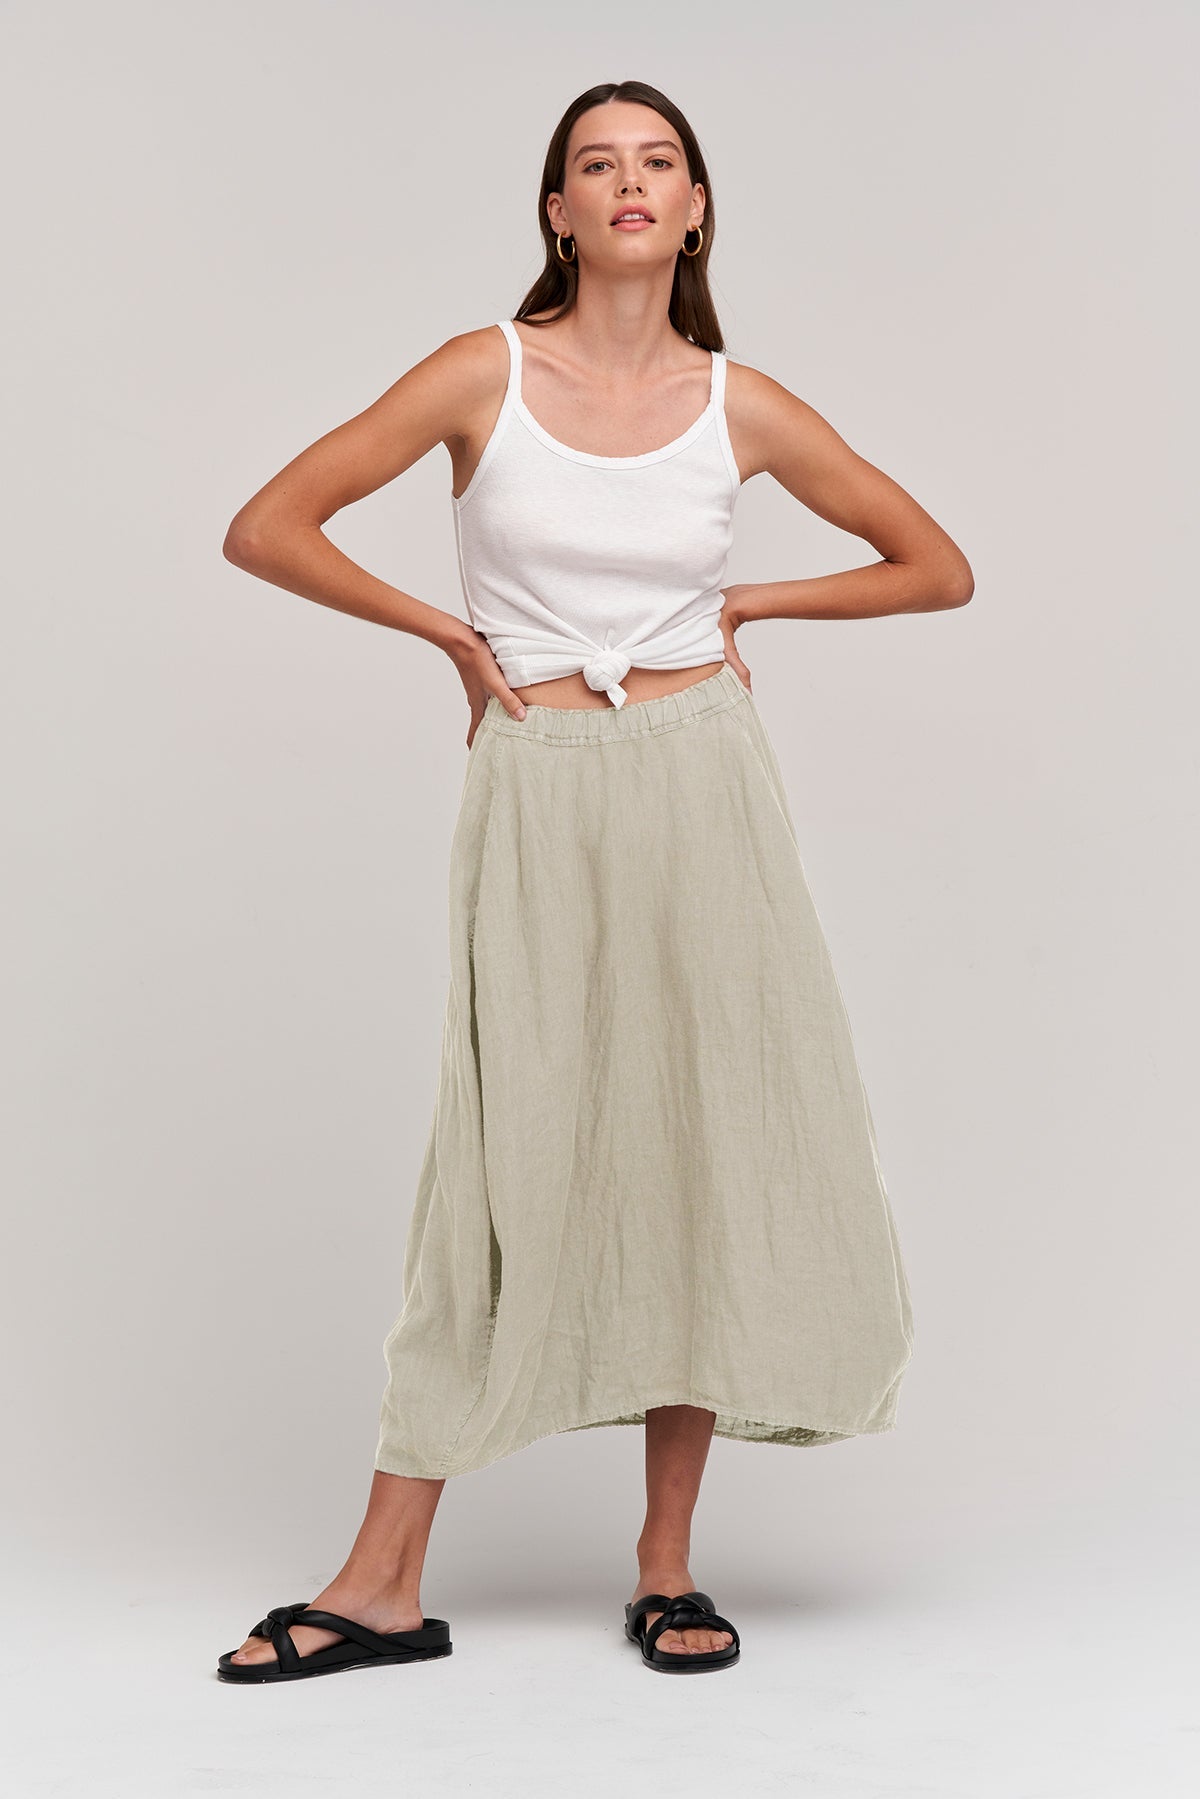   The model is wearing a white tank top and a Velvet by Graham & Spencer FAE LINEN A-LINE SKIRT. 